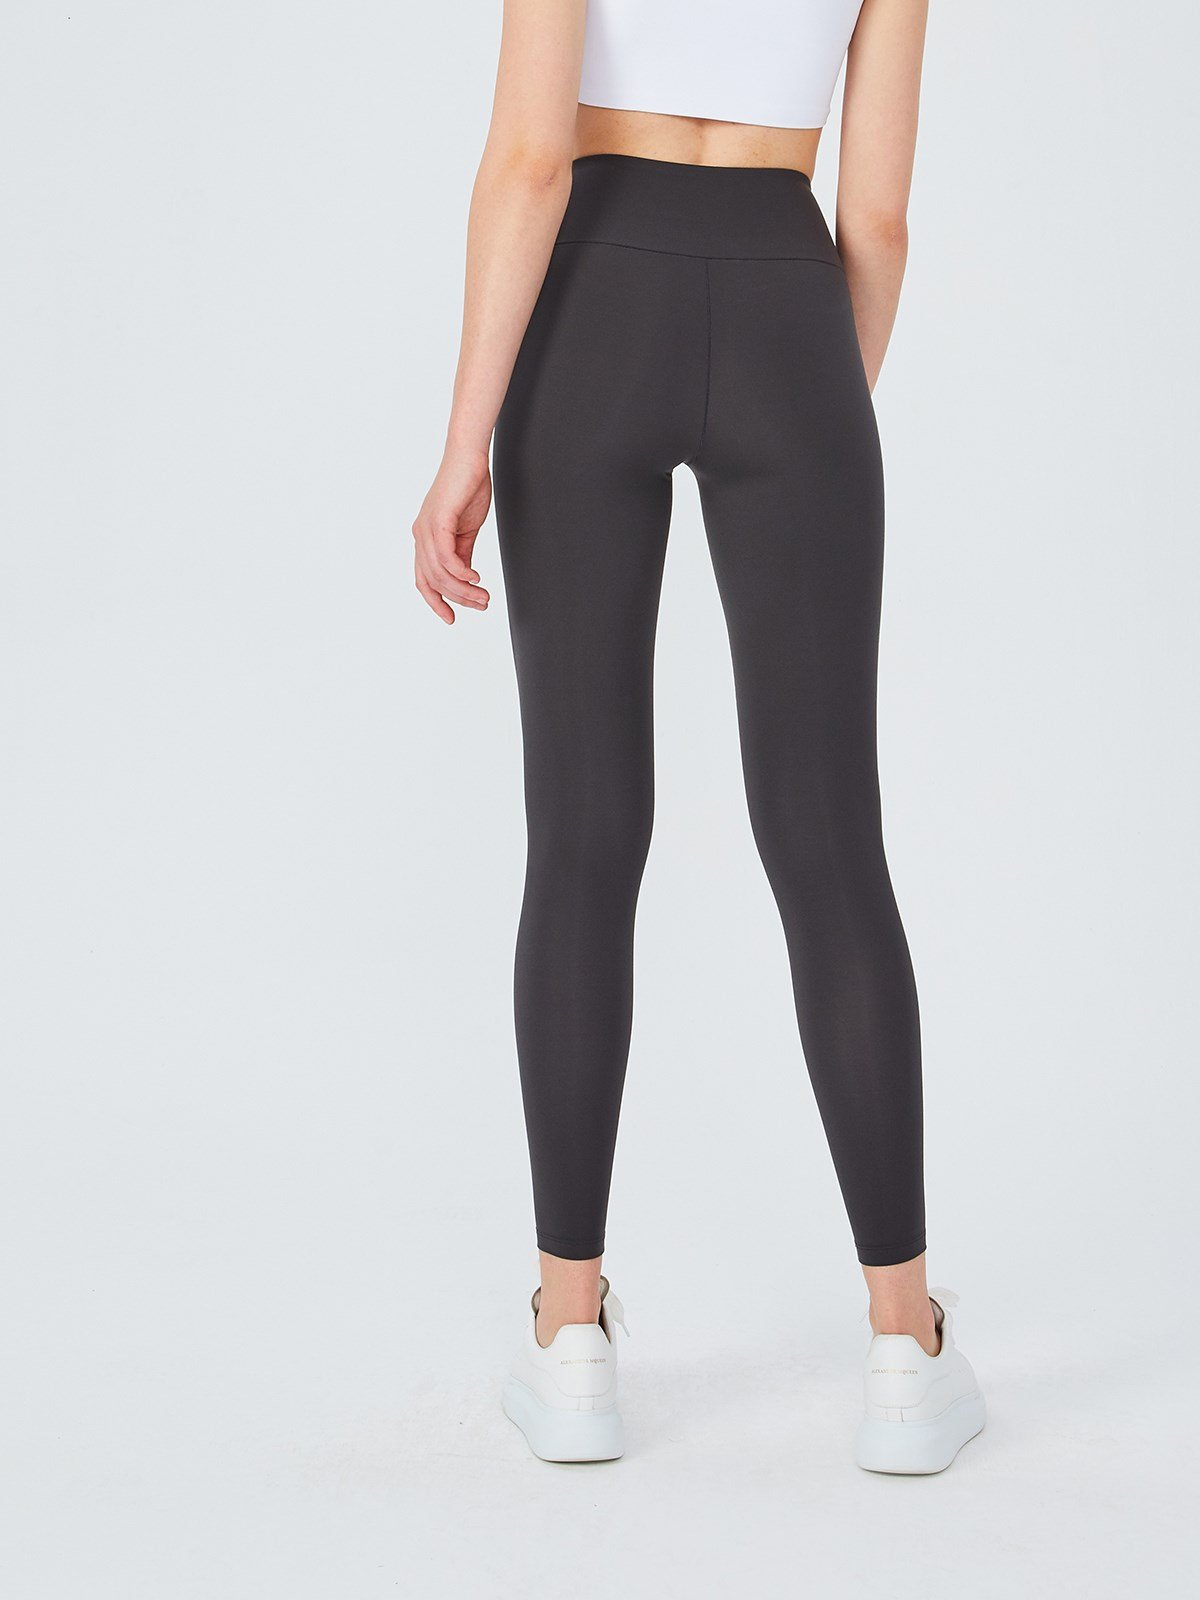 High Waisted Glittered Push Up Workout Leggings – iBay Direct